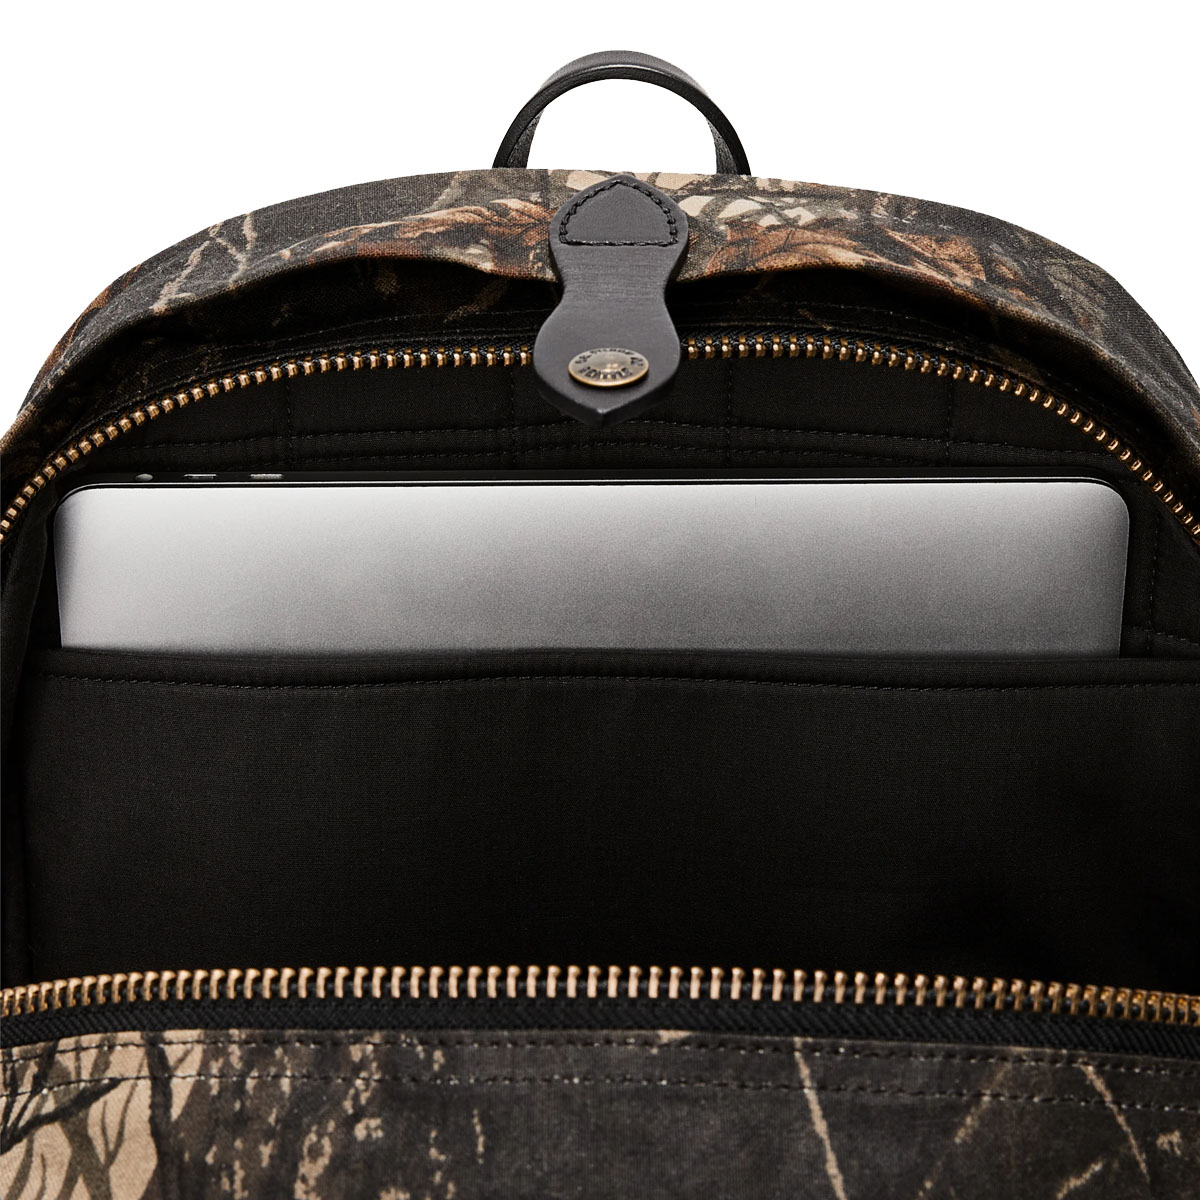 Filson Journeyman Backpack Realtree Hardwoods Camo, great for hiking and for hauling stuff around town